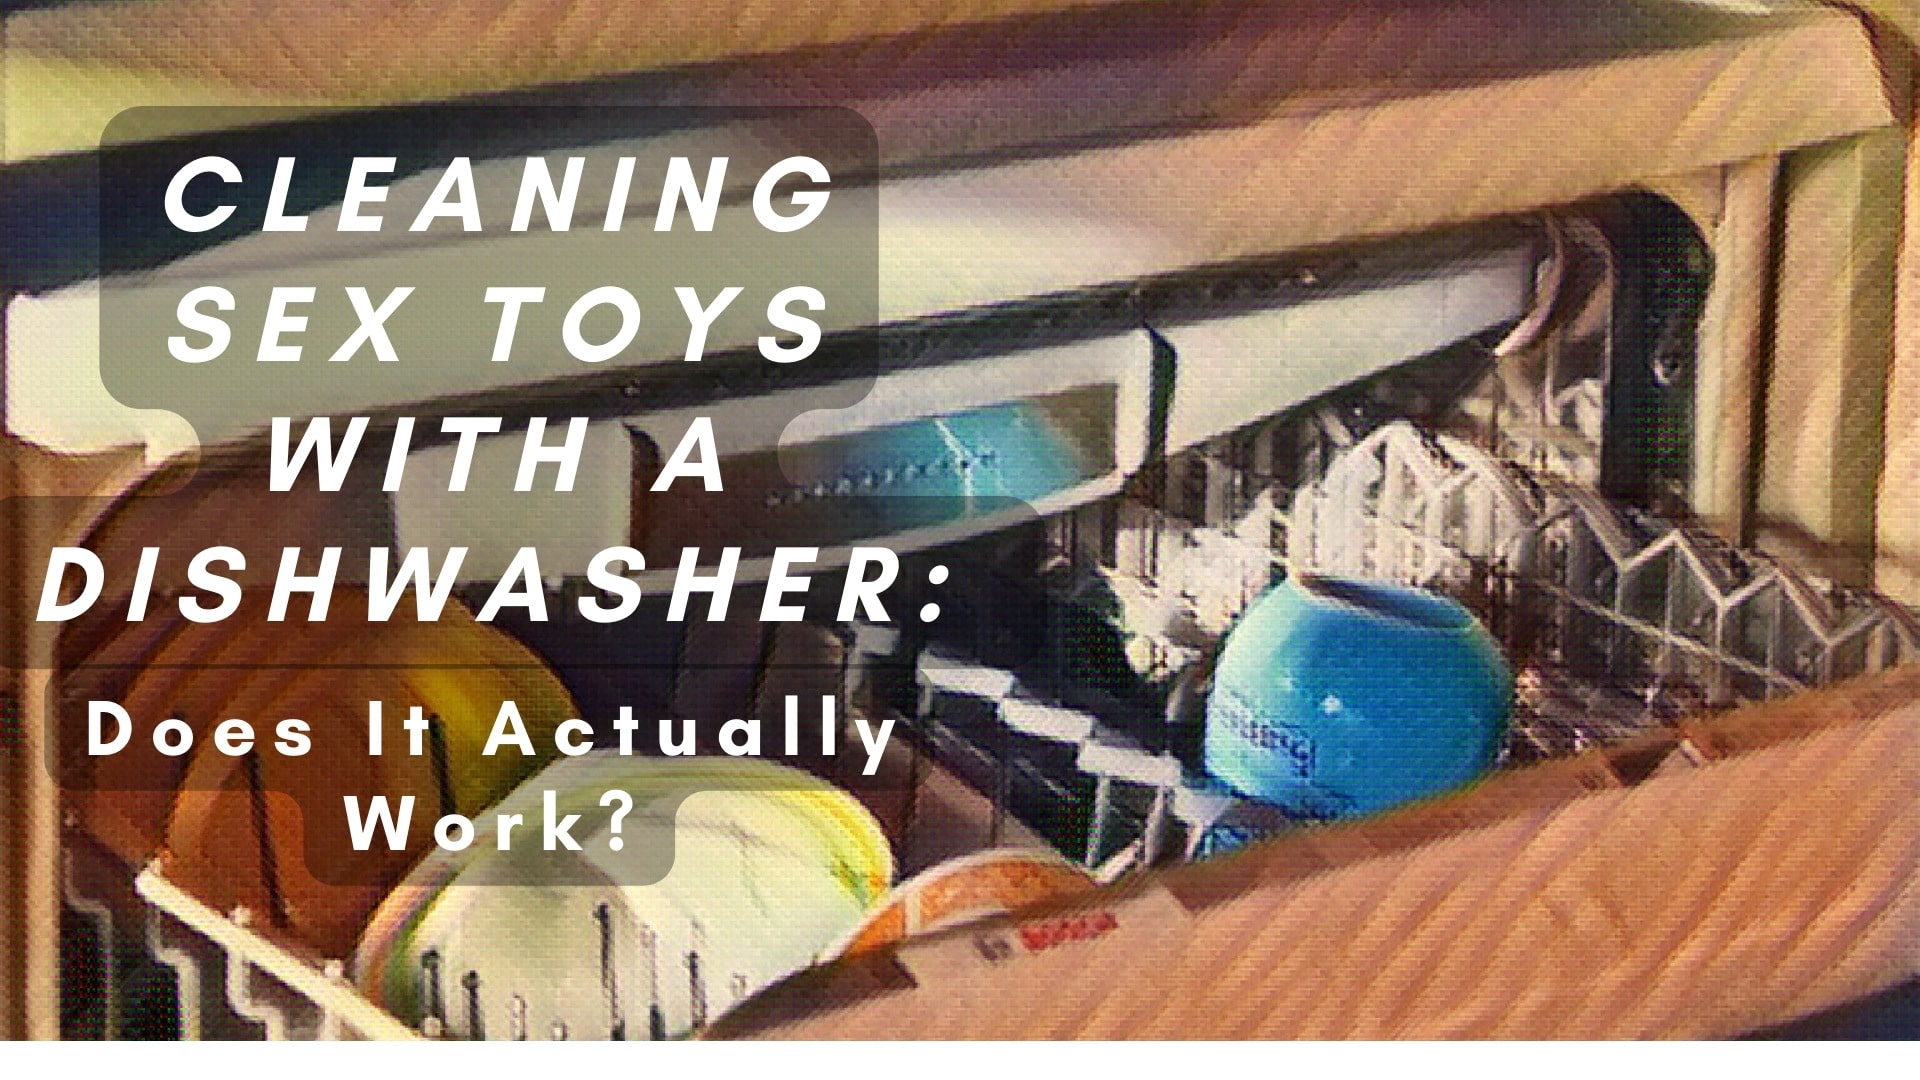 Cleaning Sex Toys With a Dishwasher: Does It Actually Work?